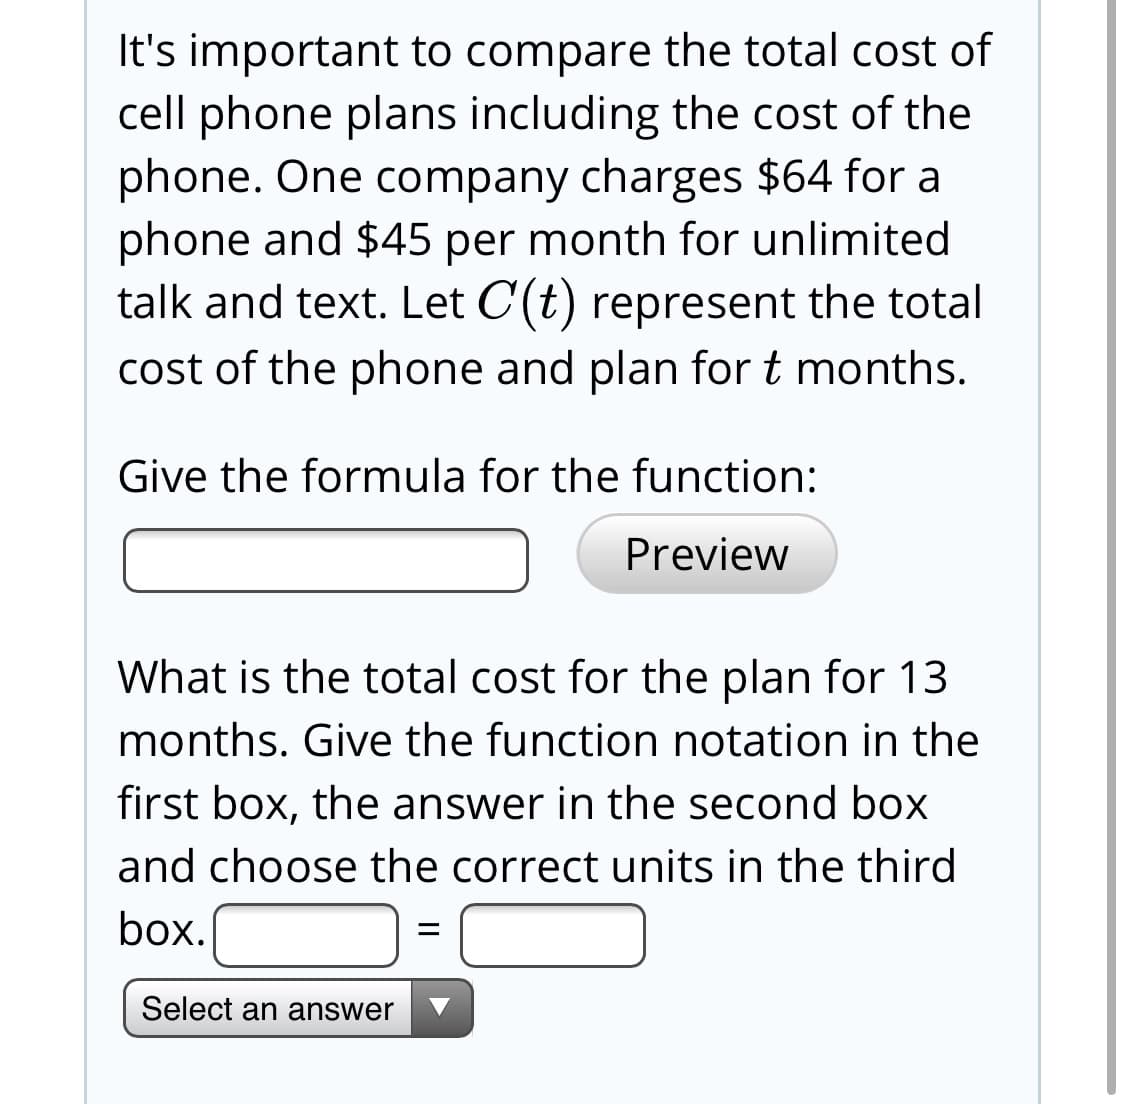 It's important to compare the total cost of
cell phone plans including the cost of the
phone. One company charges $64 for a
phone and $45 per month for unlimited
talk and text. Let C(t) represent the total
cost of the phone and plan for t months.
Give the formula for the function:
Preview
What is the total cost for the plan for 13
months. Give the function notation in the
first box, the answer in the second box
and choose the correct units in the third
box.
Select an answer
